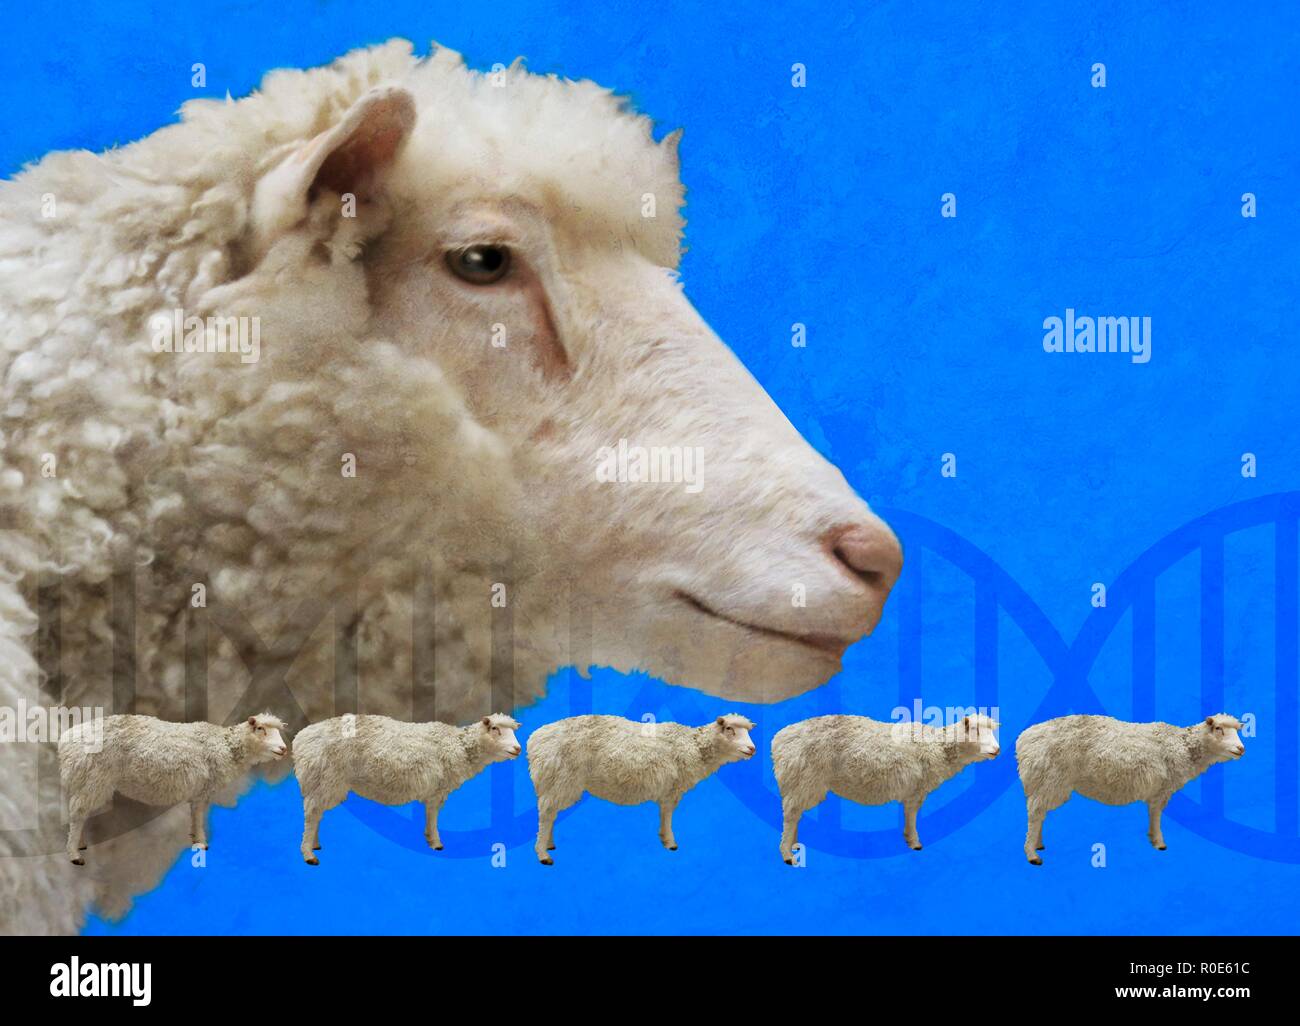 Dolly the sheep High Resolution Stock Photography and Images - Alamy